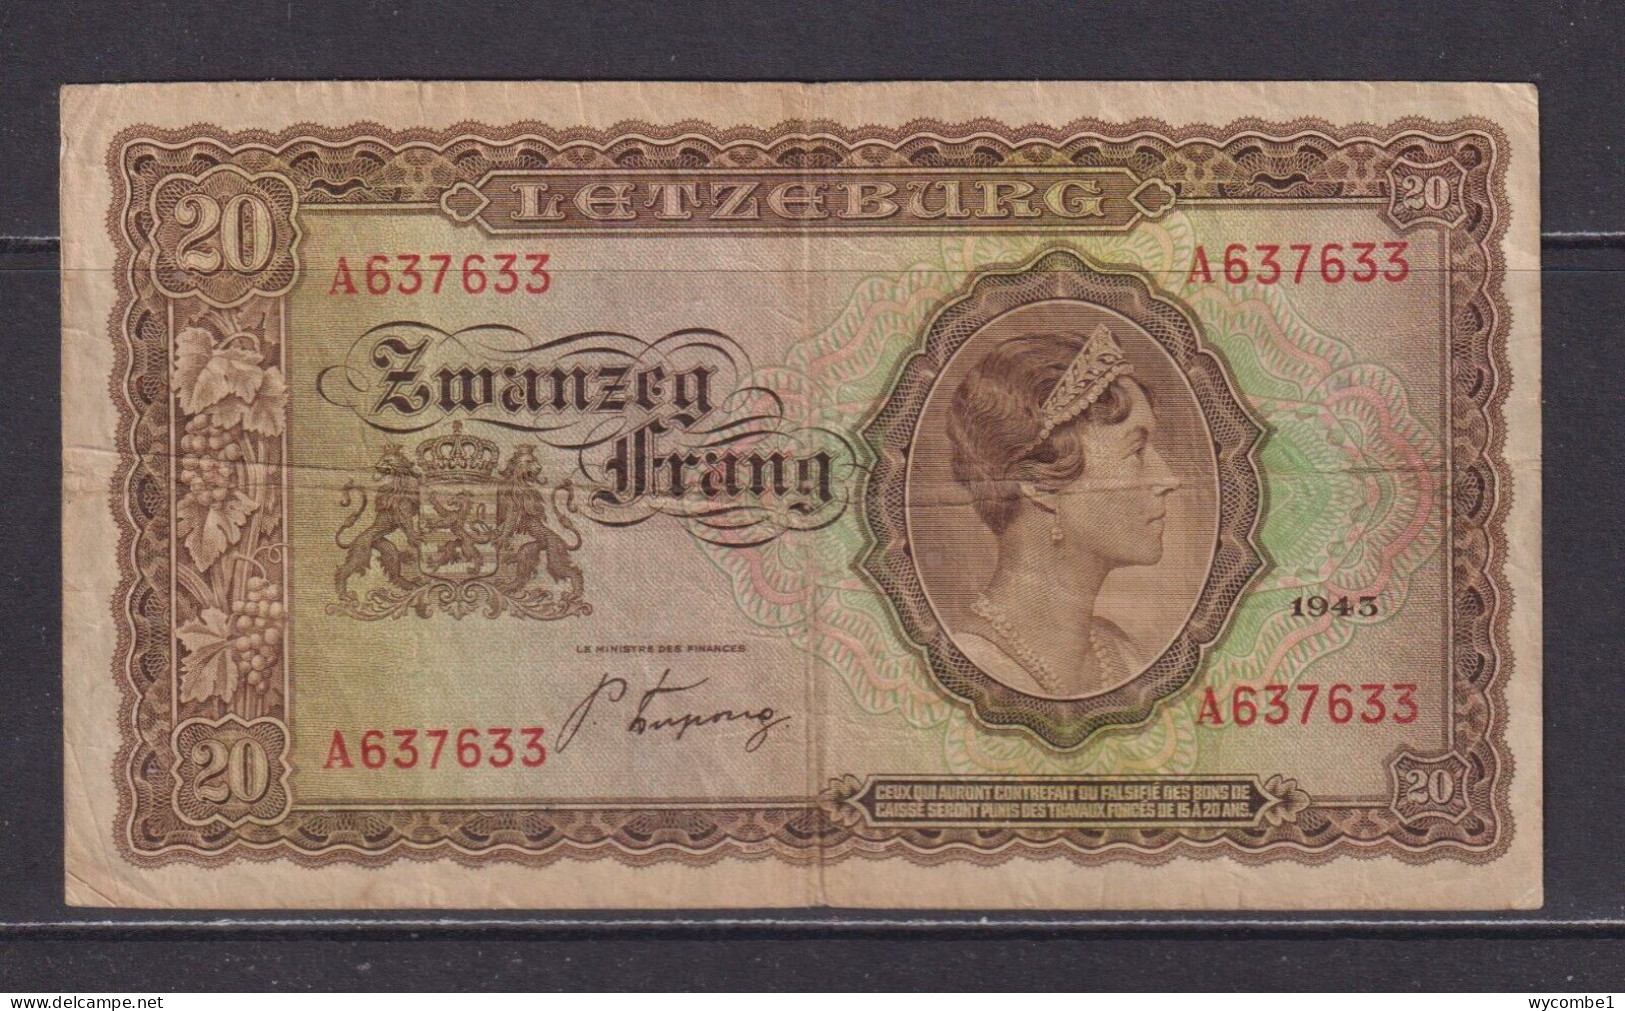 LUXEMBOURG - 1943 20 Francs Circulated Banknote - Lussemburgo